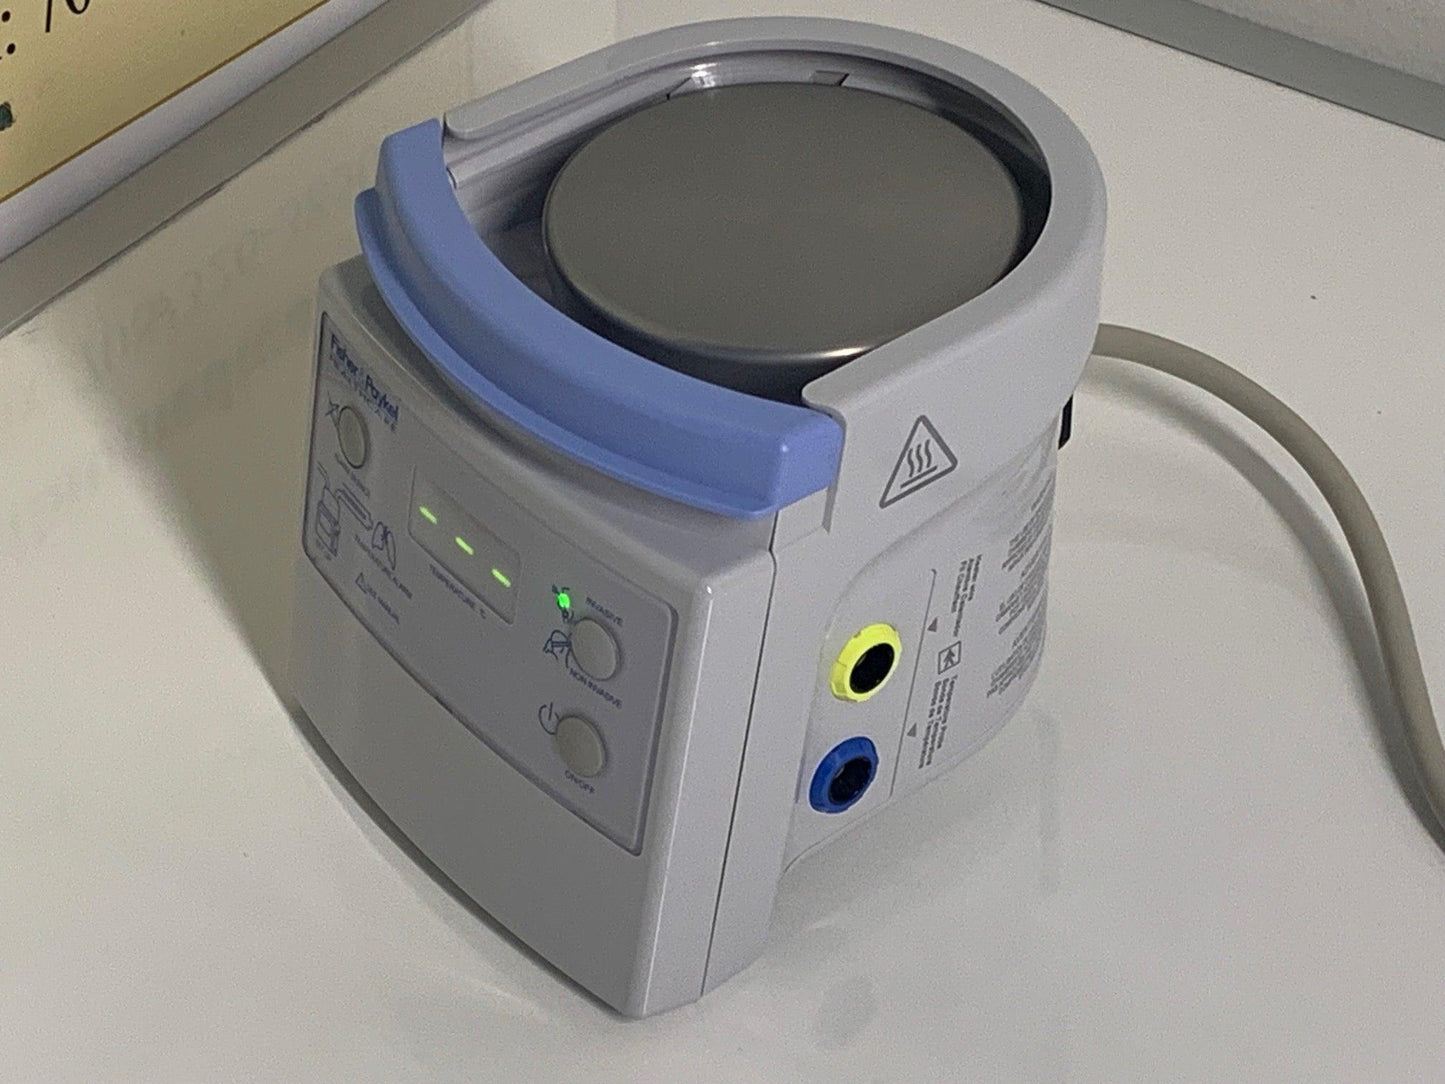 REFURBISHED Fisher & Paykel Heated Respiratory Humidifier MR850JHU - MBR Medicals